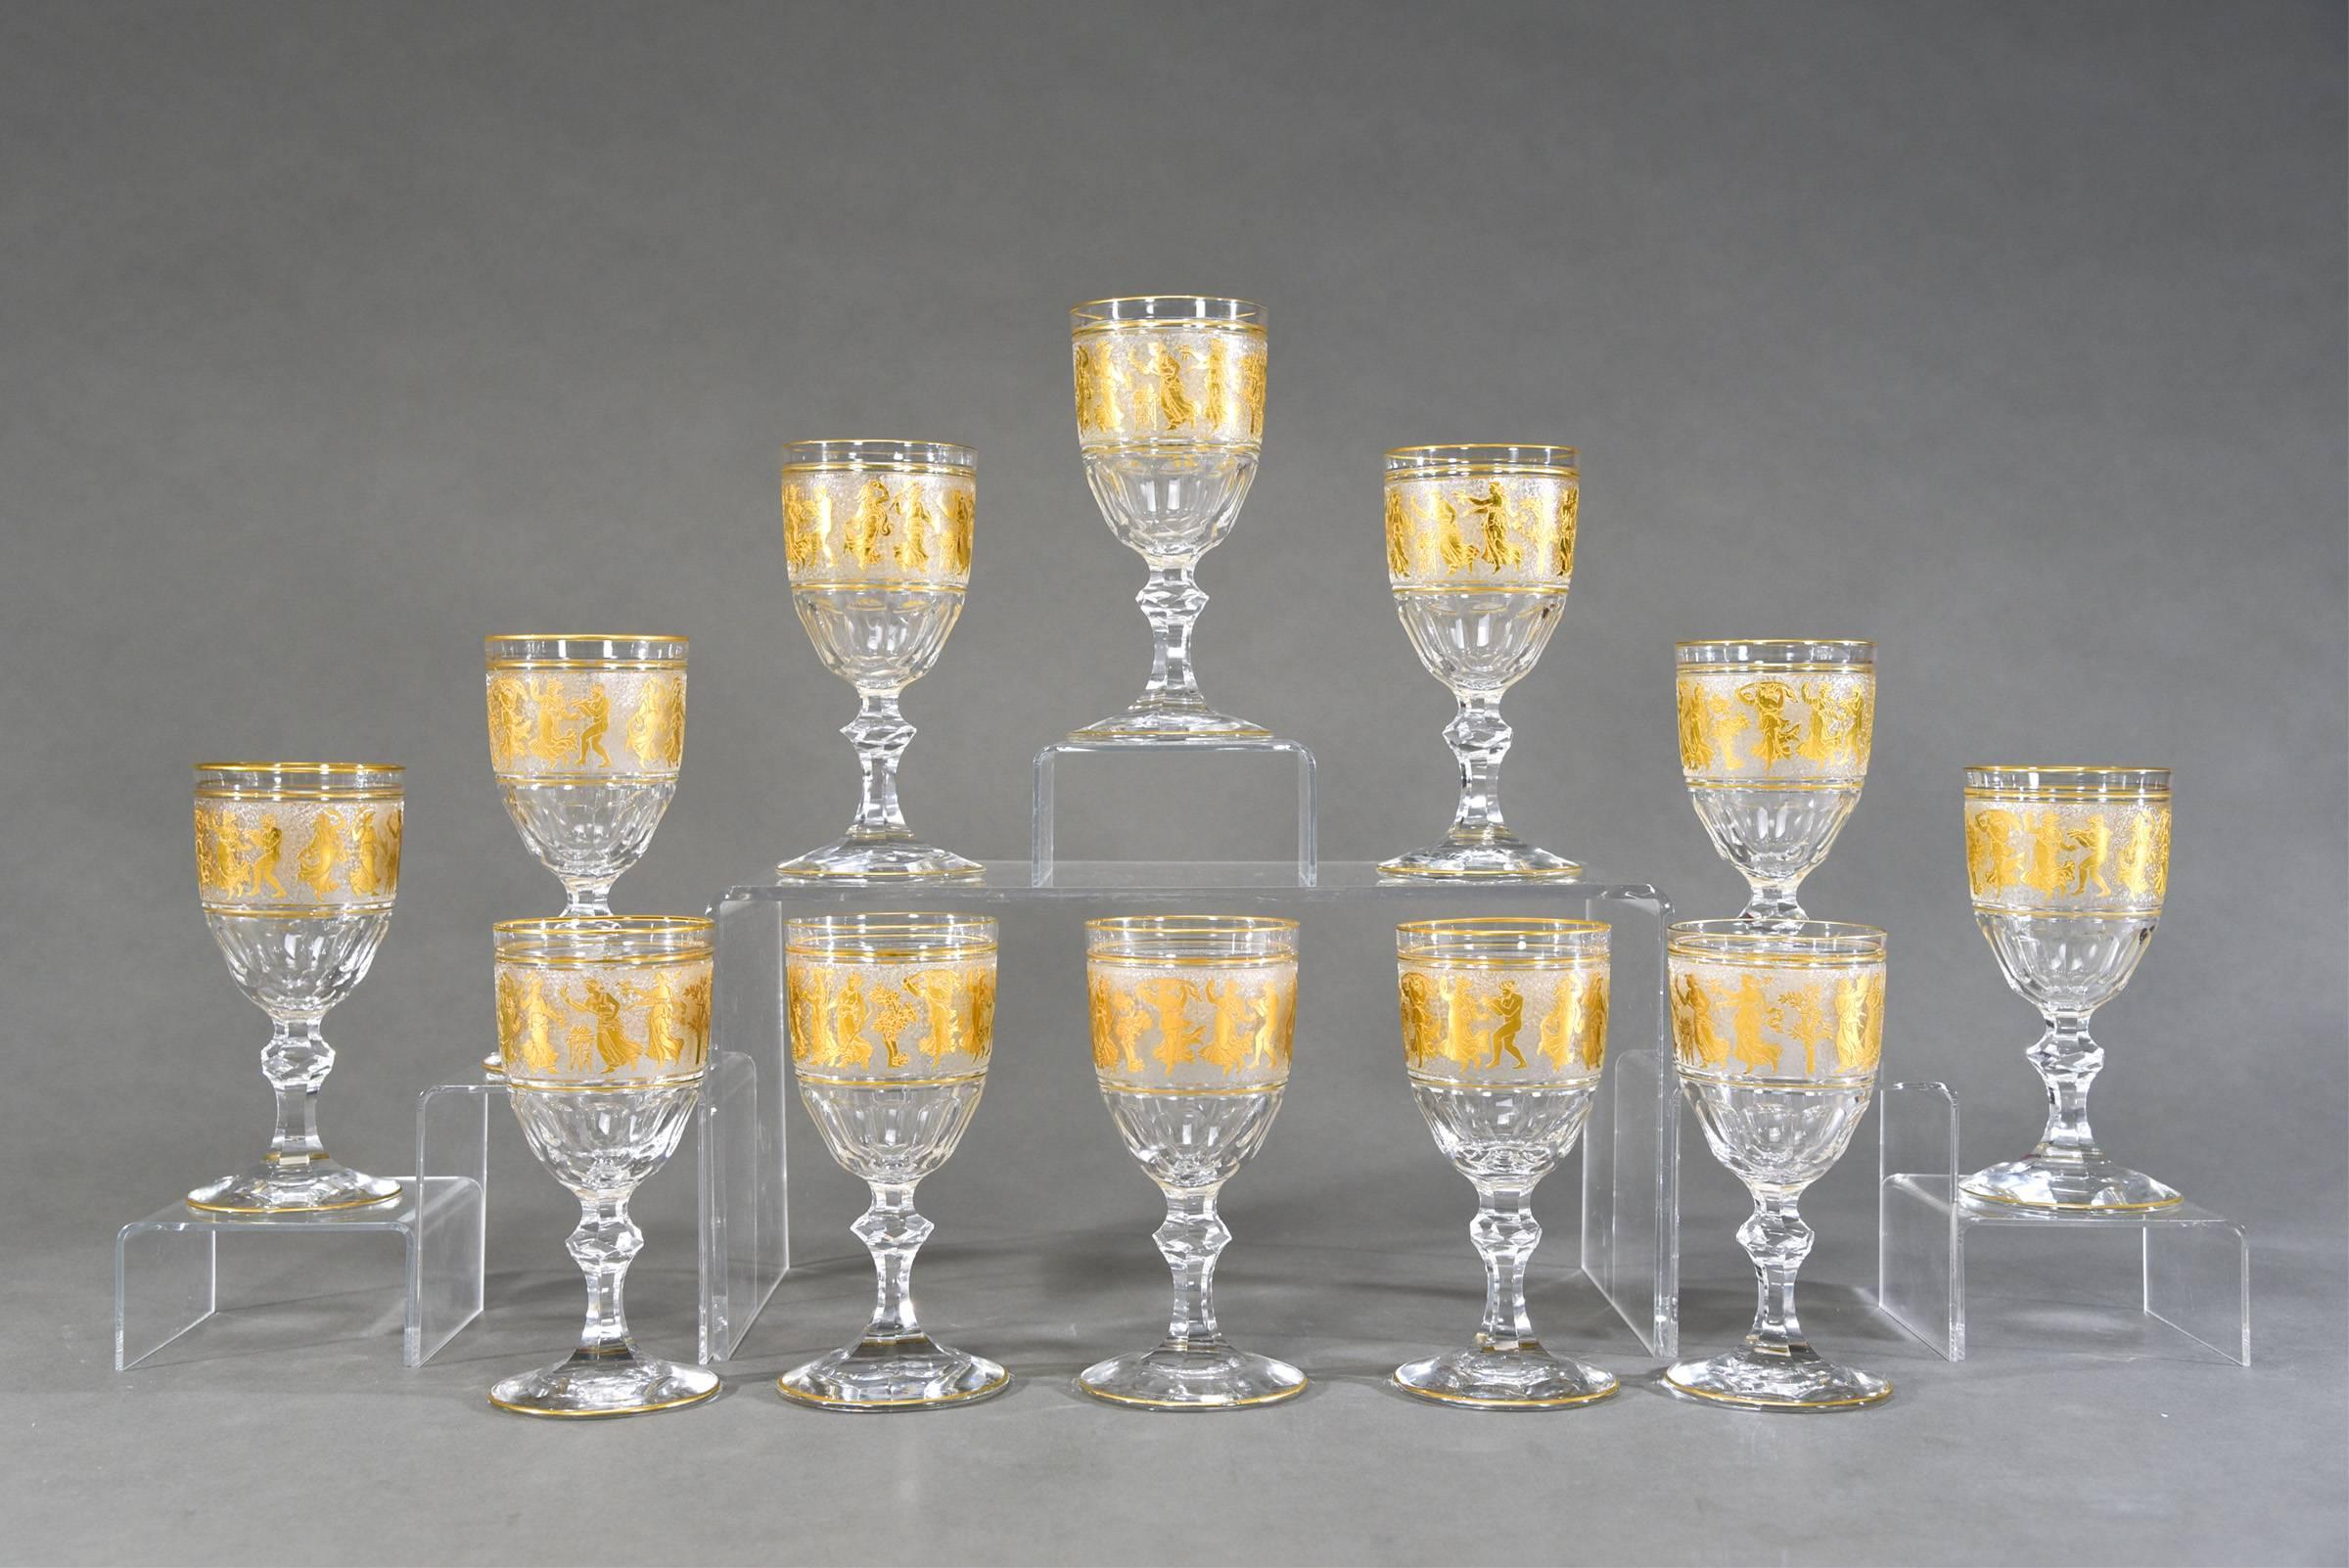 This is a magnificent set of 12 water or wine goblets made by Val St. Lambert. Each one is handblown, panel cut bowl with cameo cut frieze of Roman figures embellished with gold leaf. This pattern is one of Val St. Lambert's finest and creates a